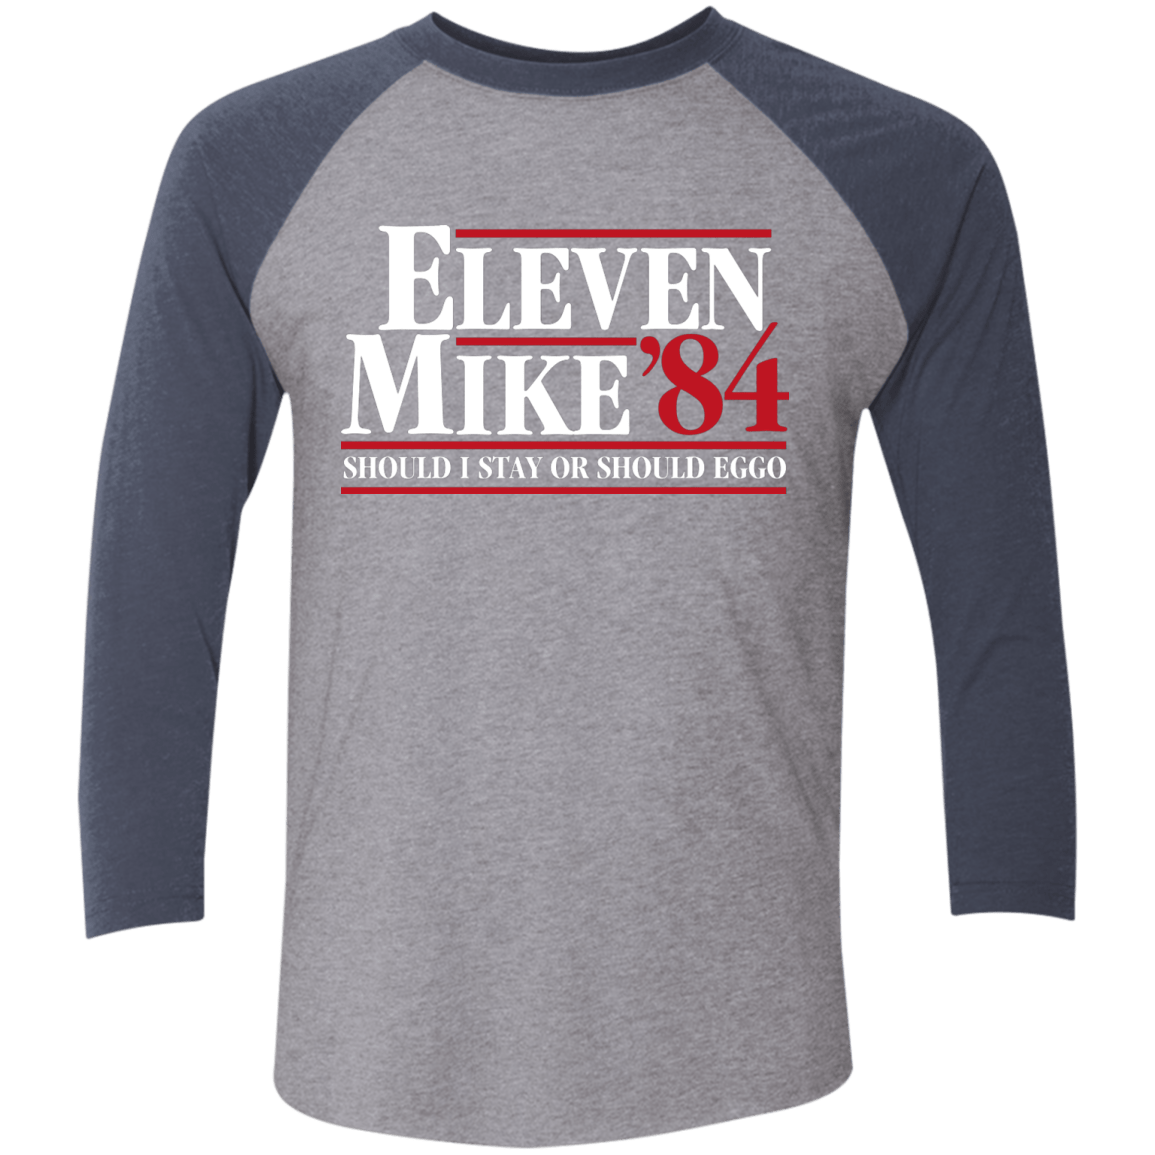 T-Shirts Premium Heather/ Vintage Navy / X-Small Eleven Mike 84 - Should I Stay or Should Eggo Men's Triblend 3/4 Sleeve